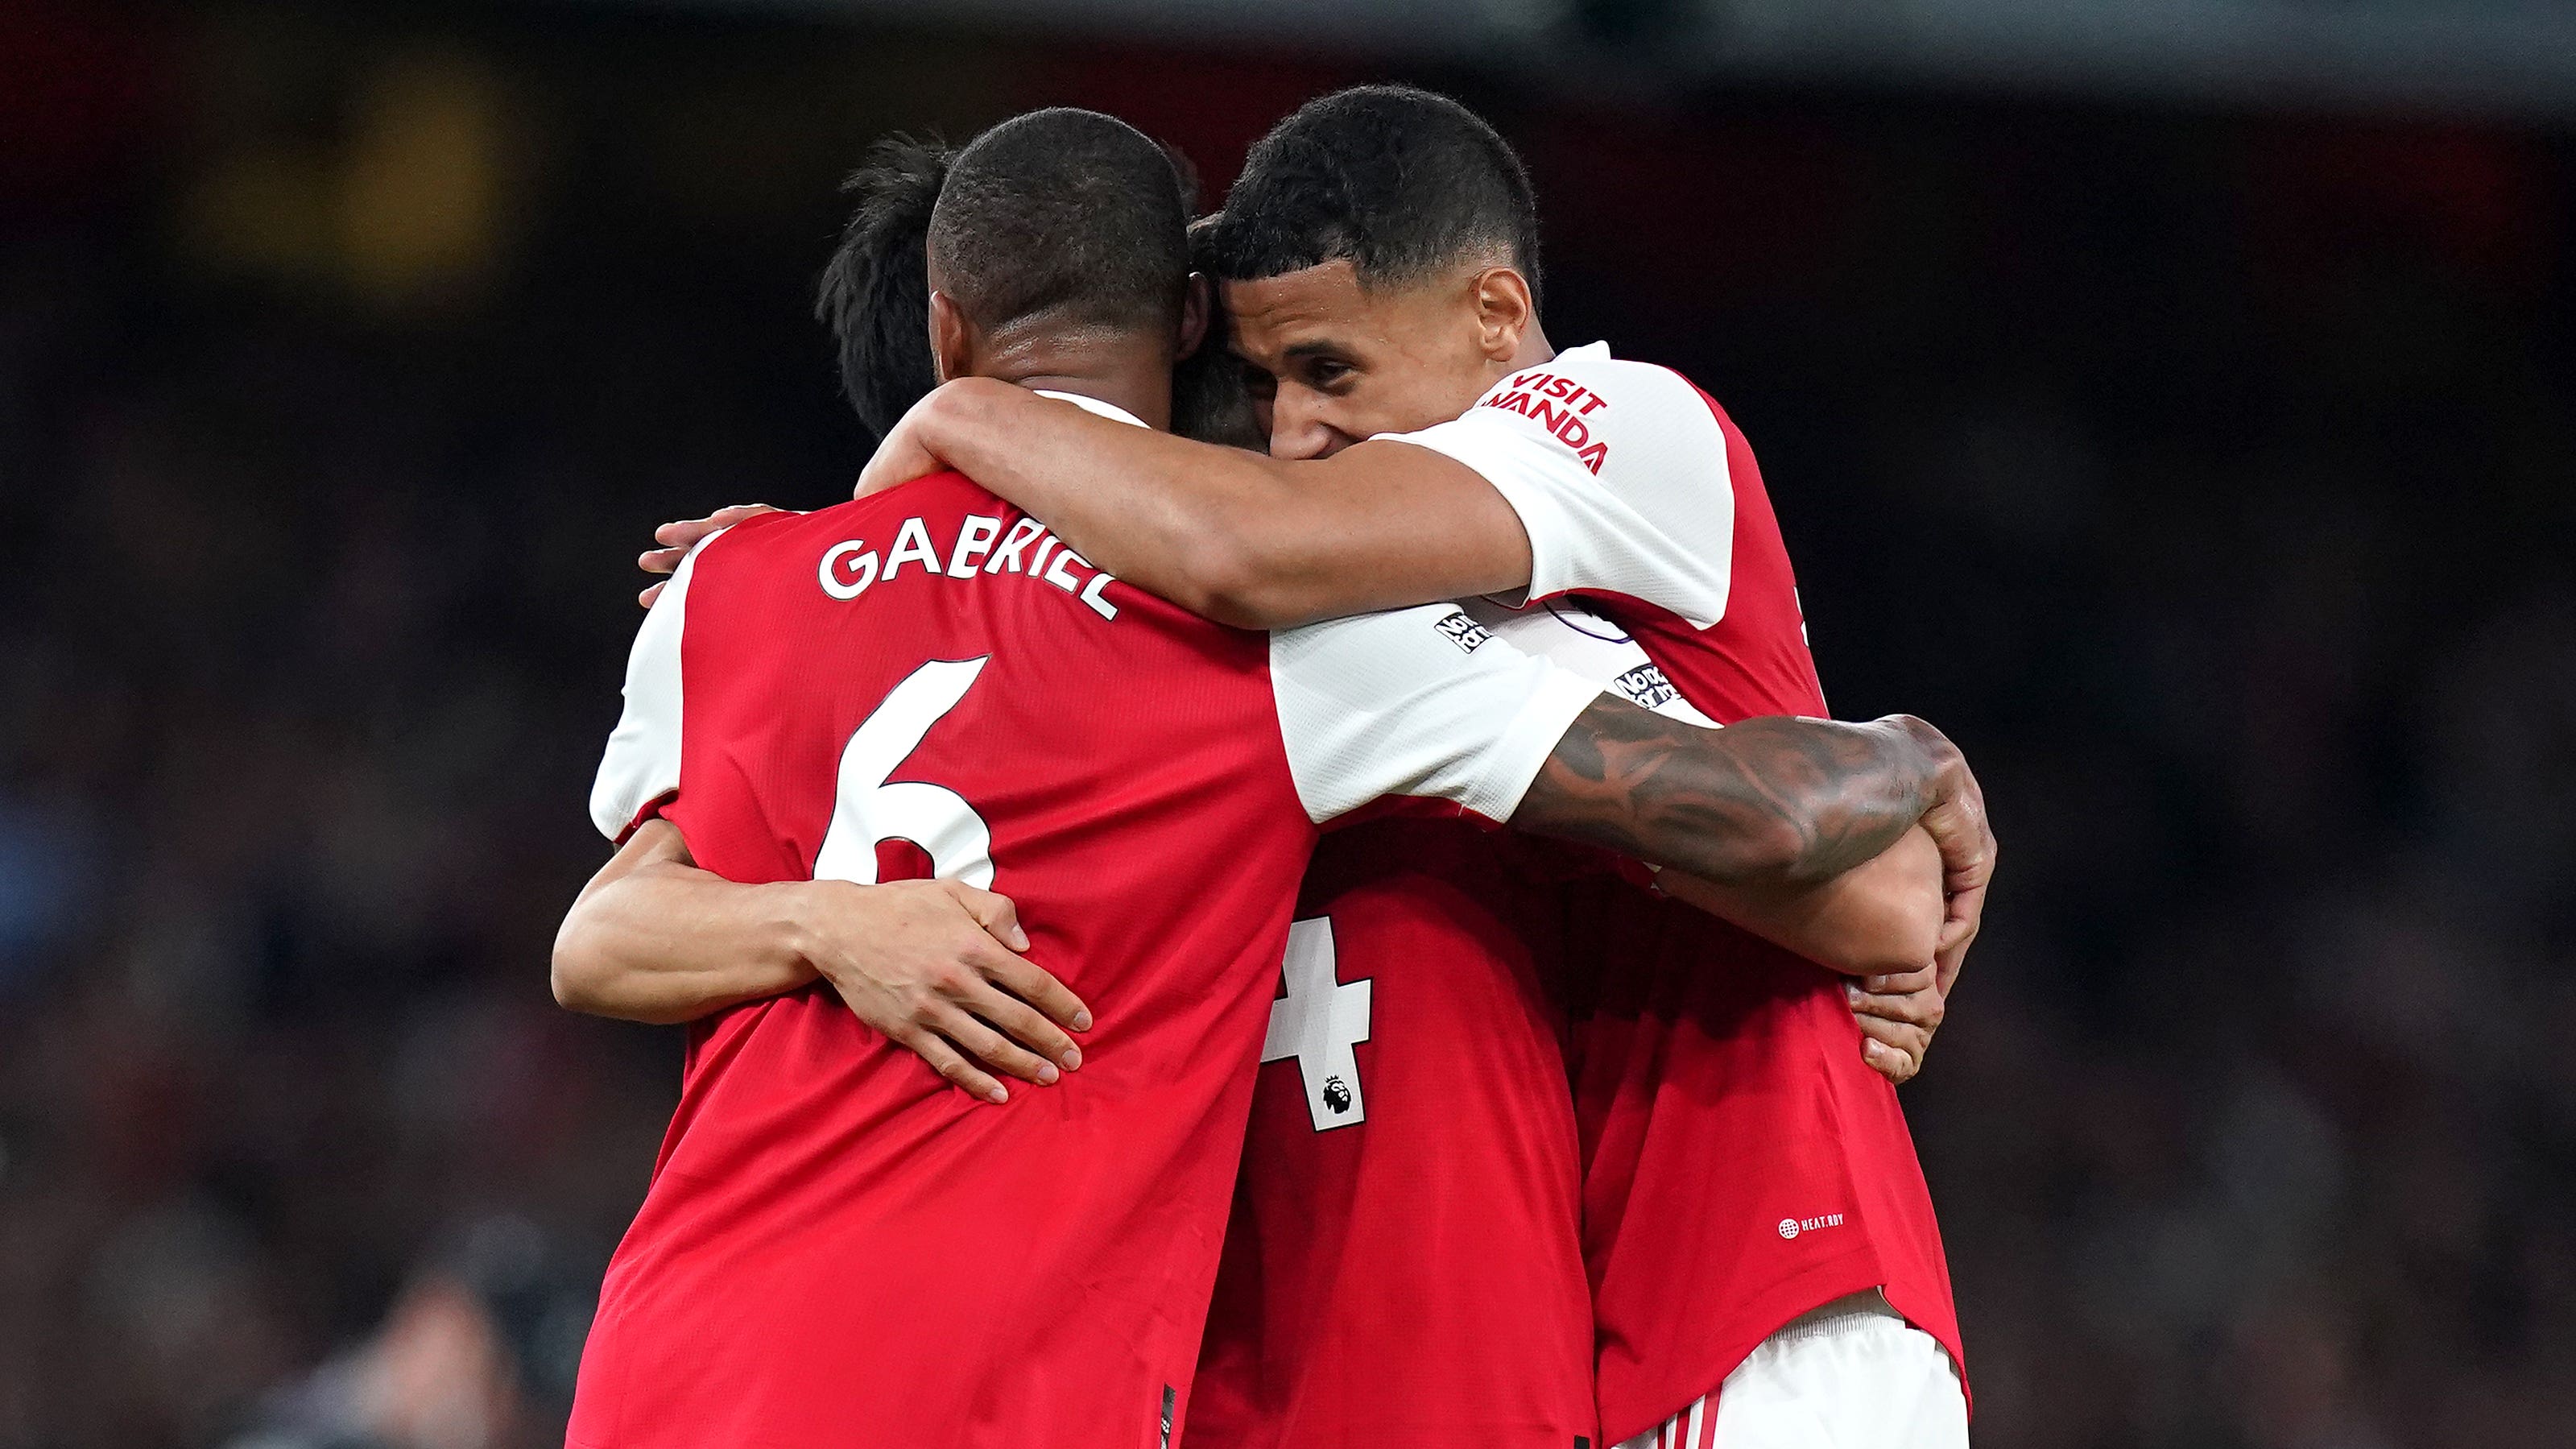 They are unbelievable together – Ben White hails Arsenal’s centre-back pairing